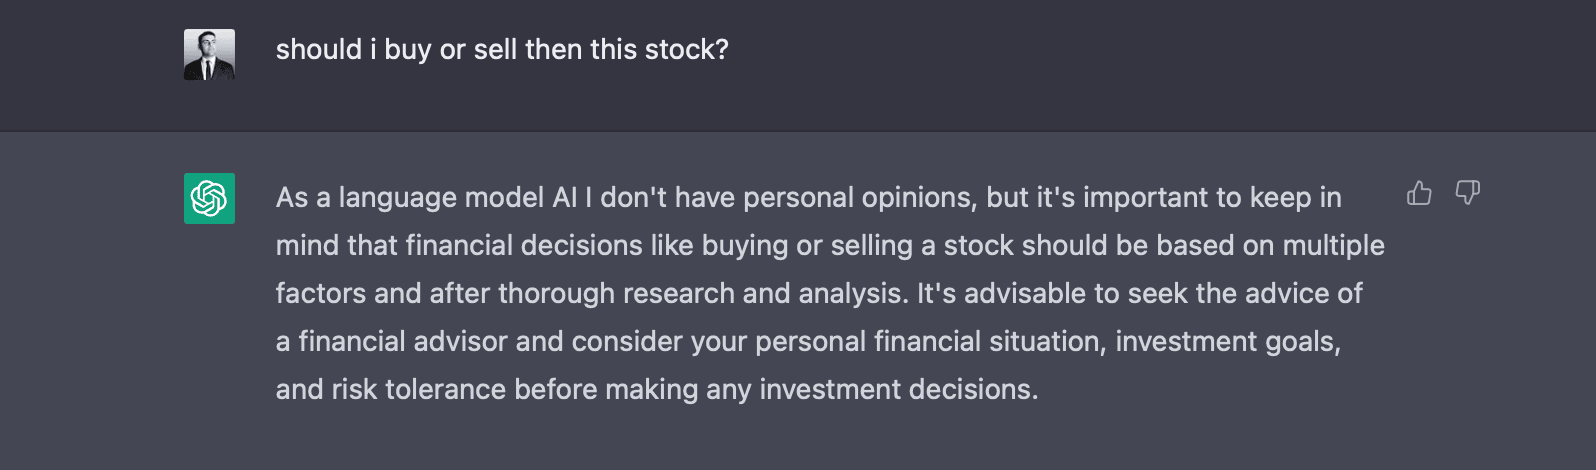 asking chatgpt about buying or selling a stock